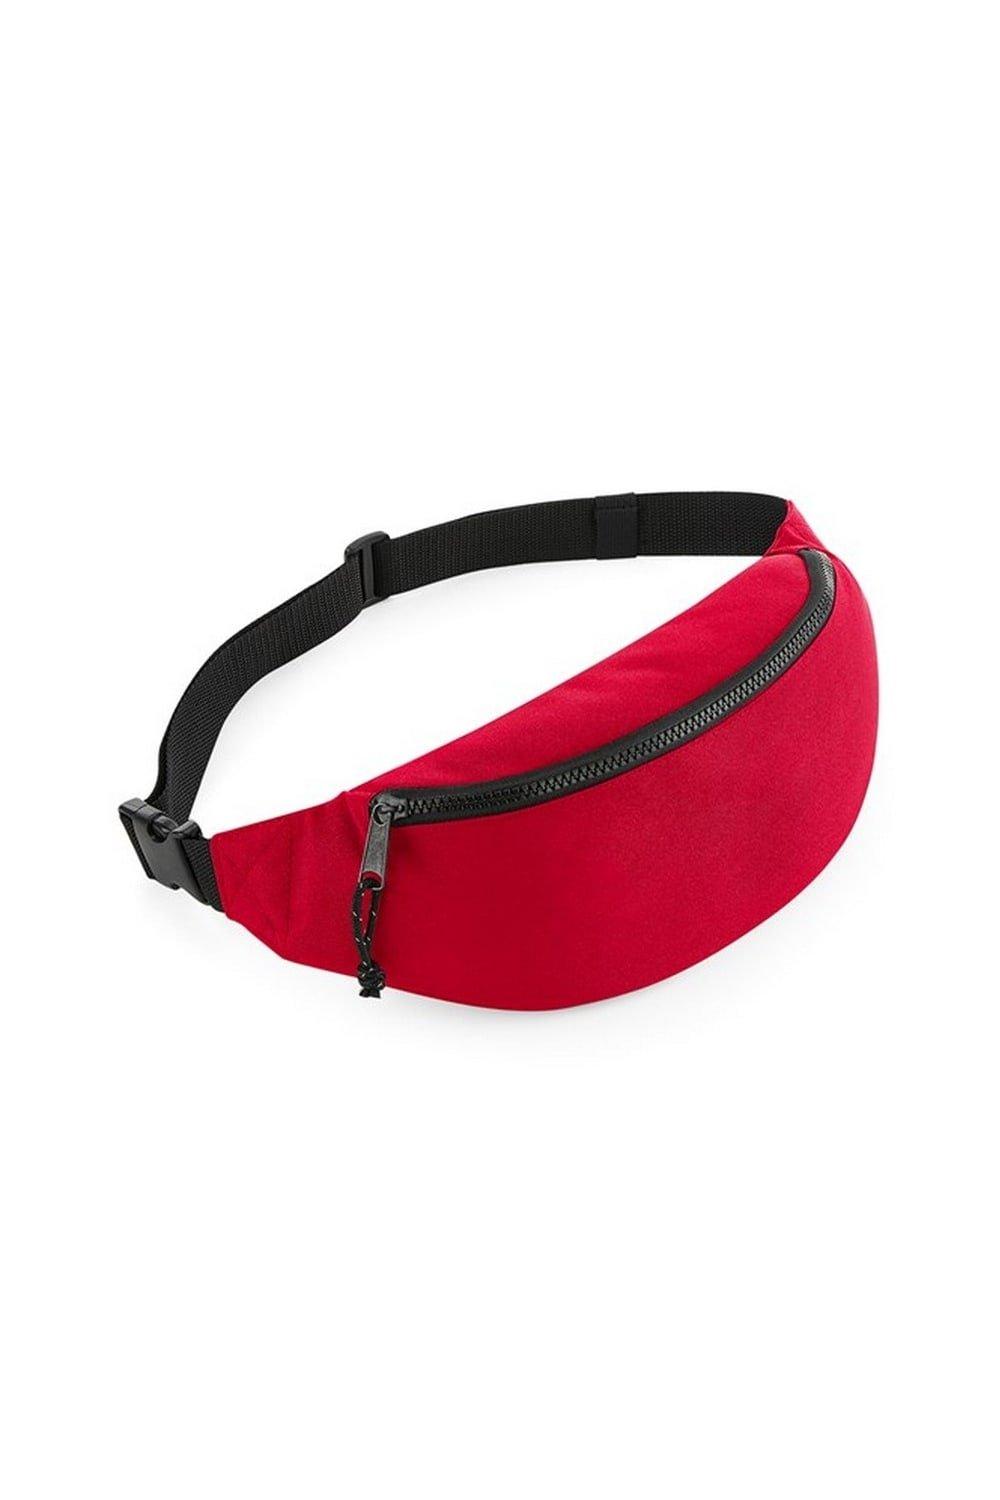 Bagbase Recycled Waist Bag|red